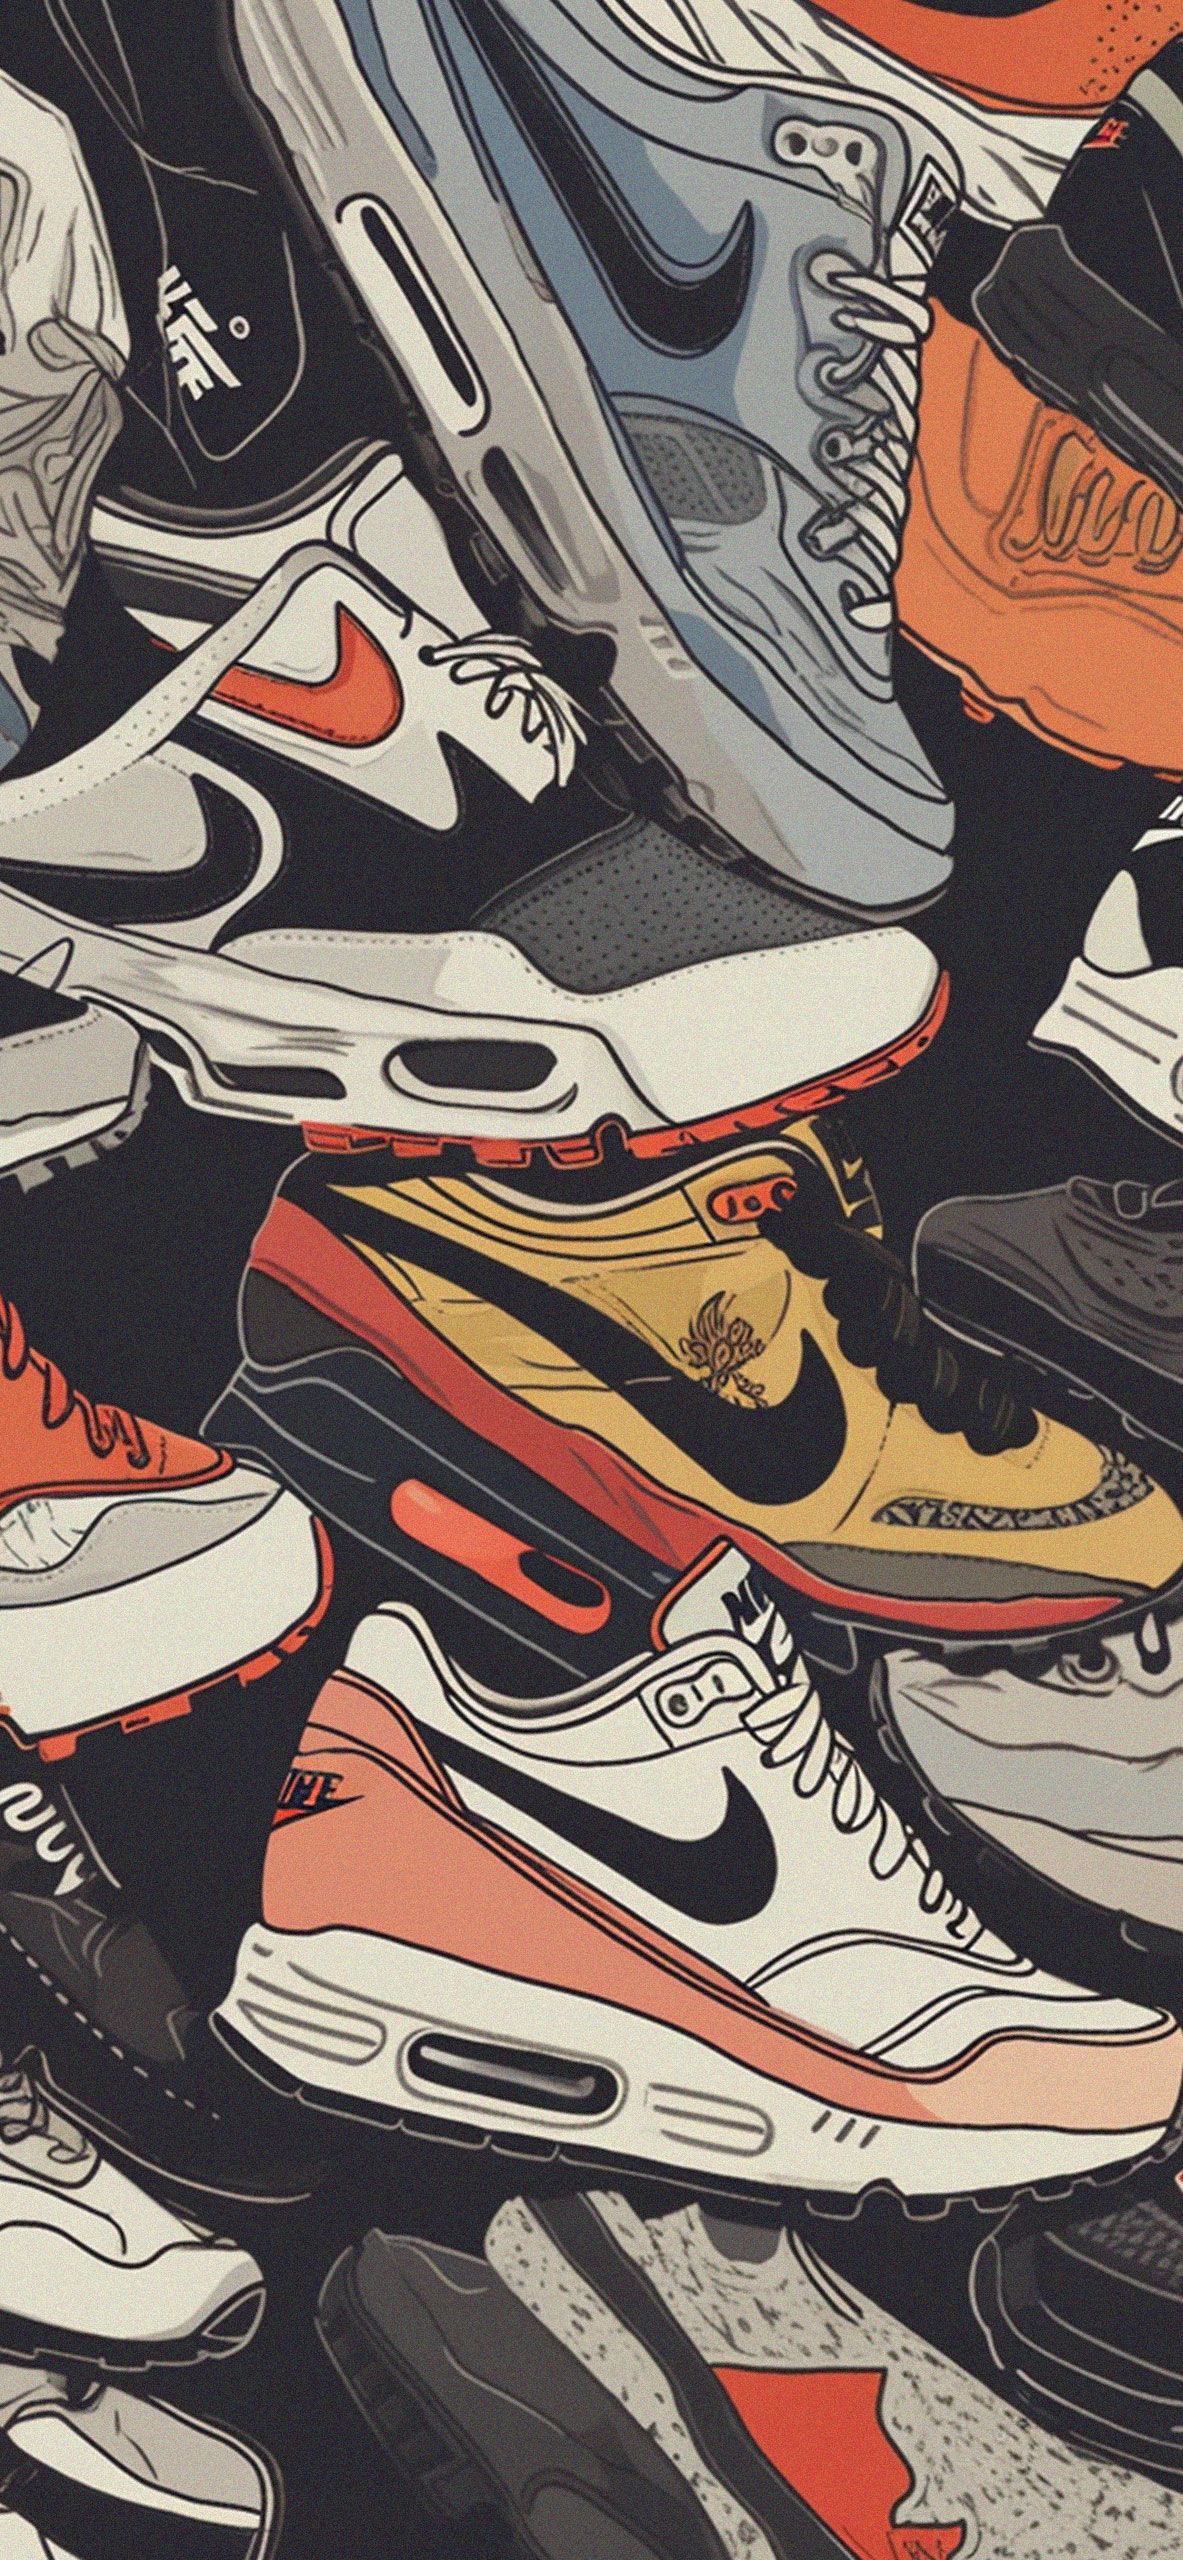 A wallpaper of a pile of nike shoes - Nike, shoes